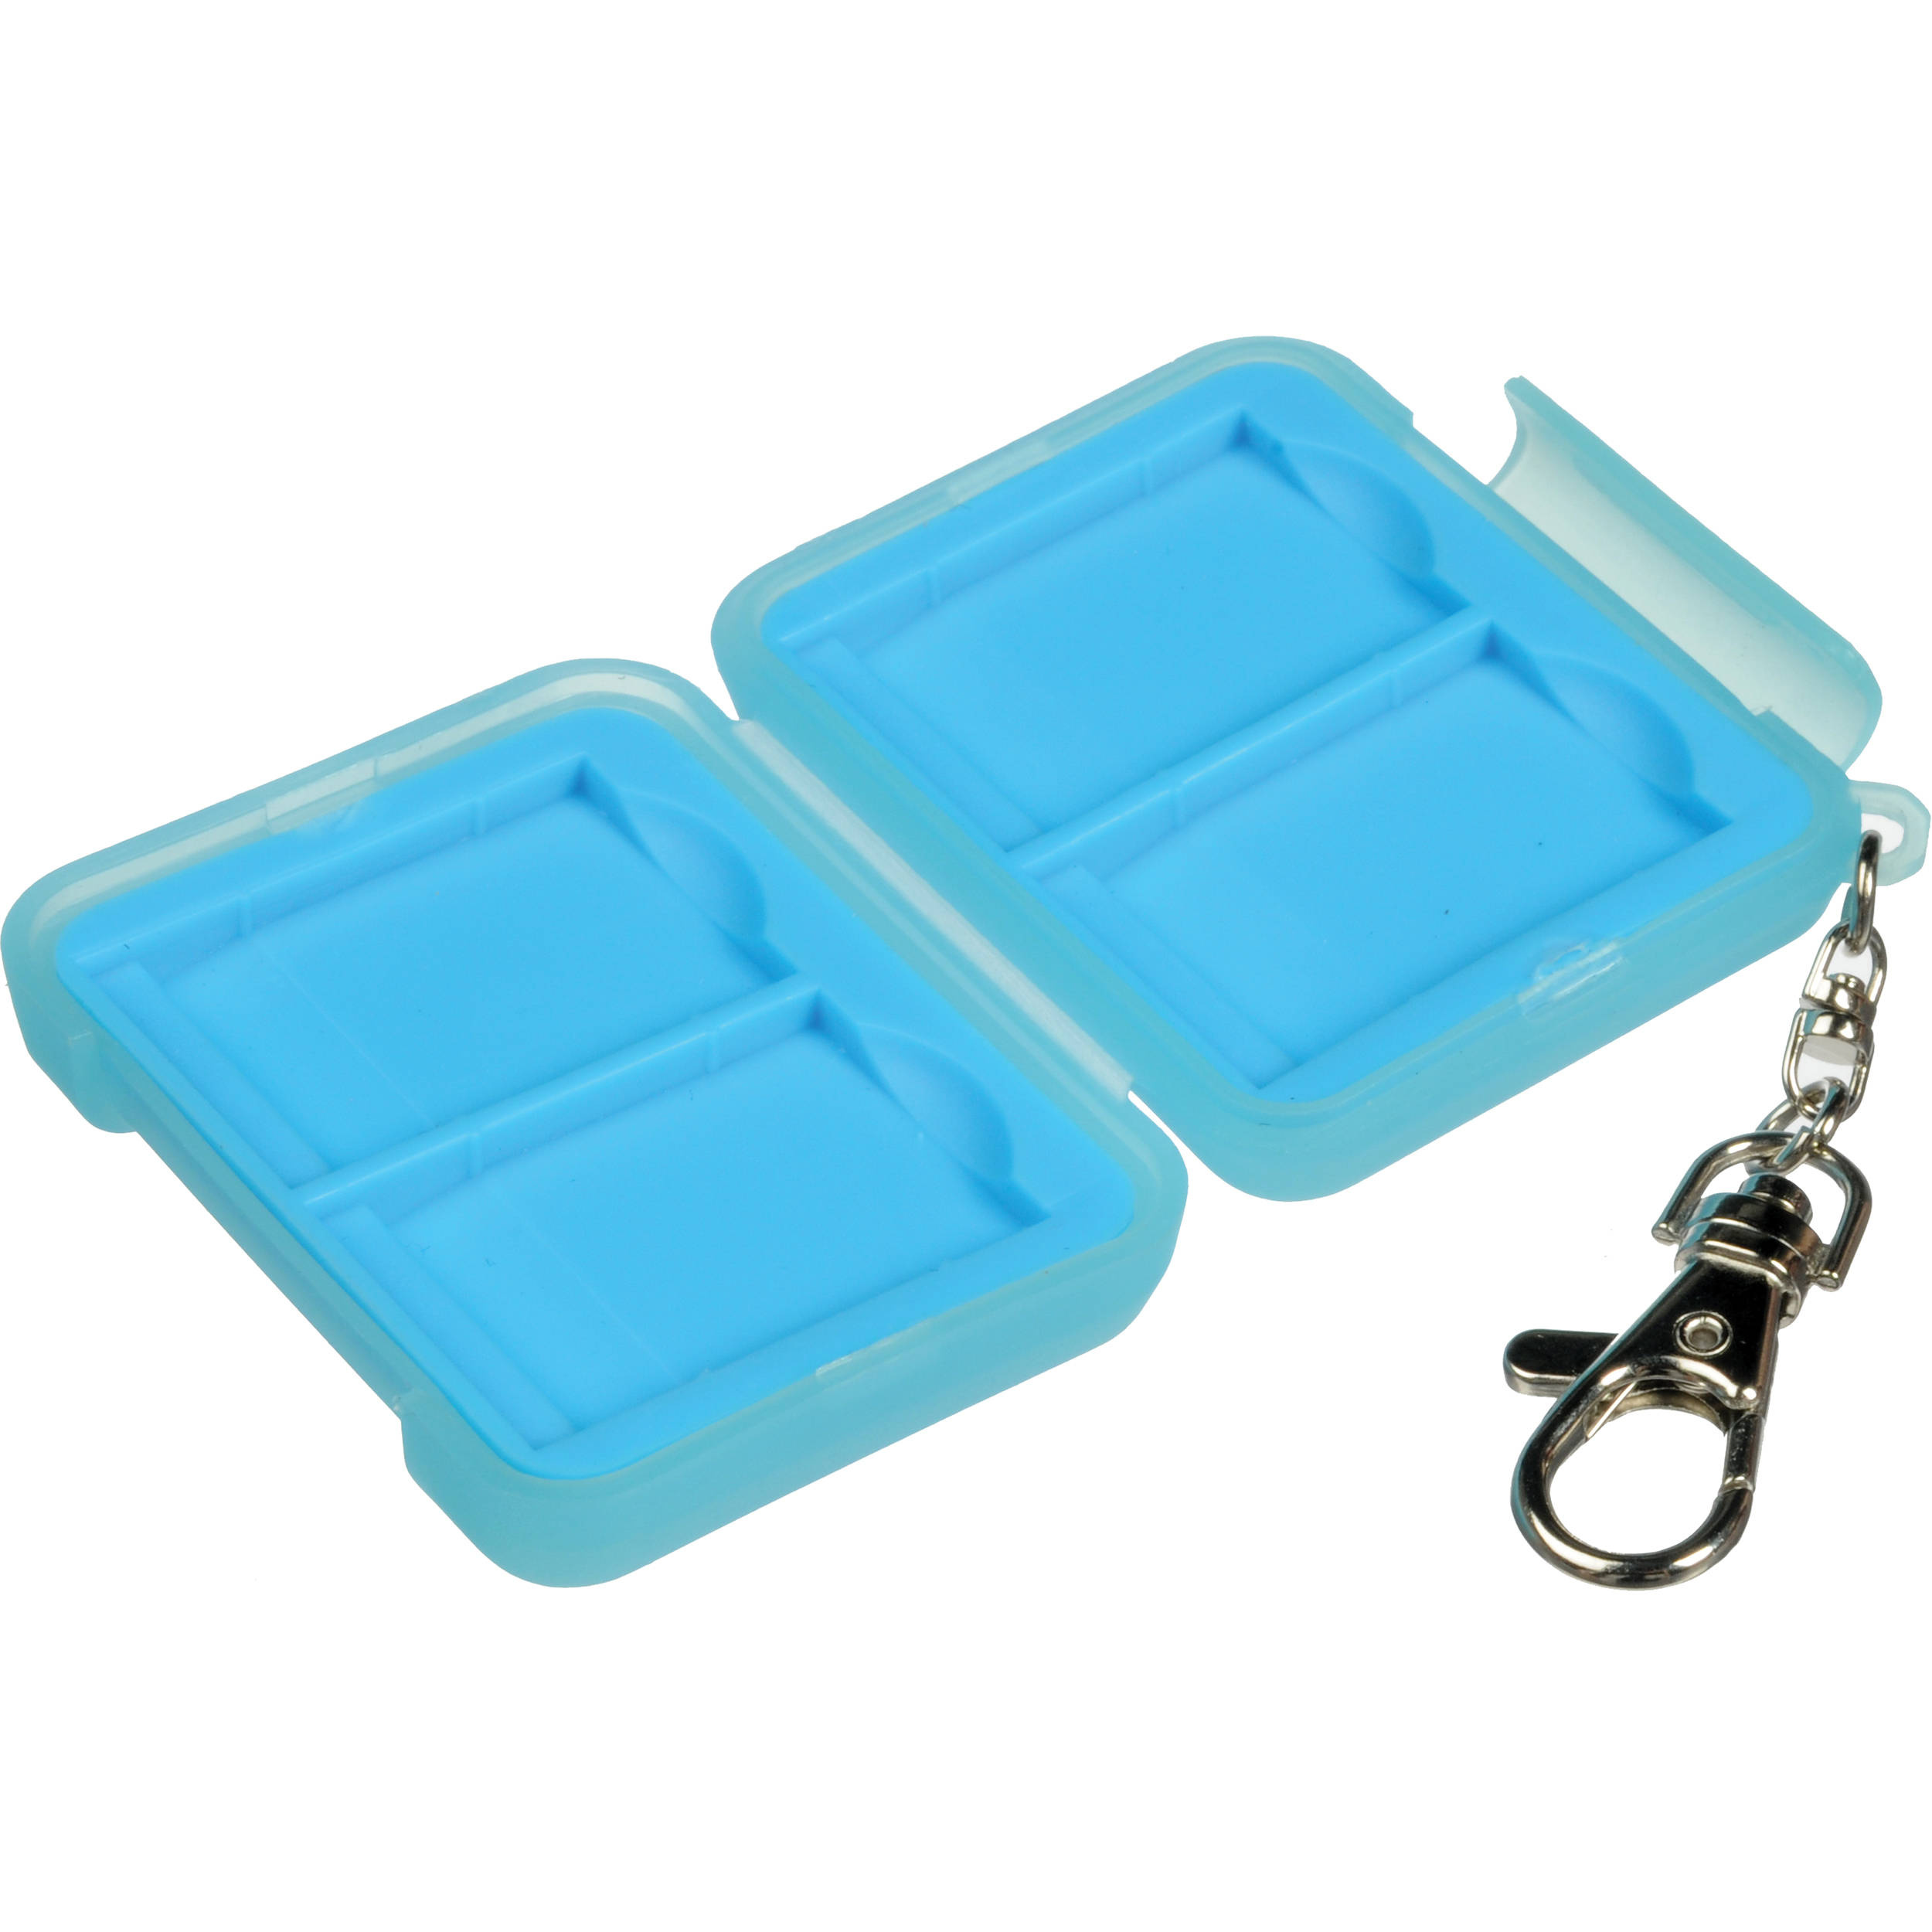 Ruggard Memory Card Case for 4 SD Cards (Light Blue)